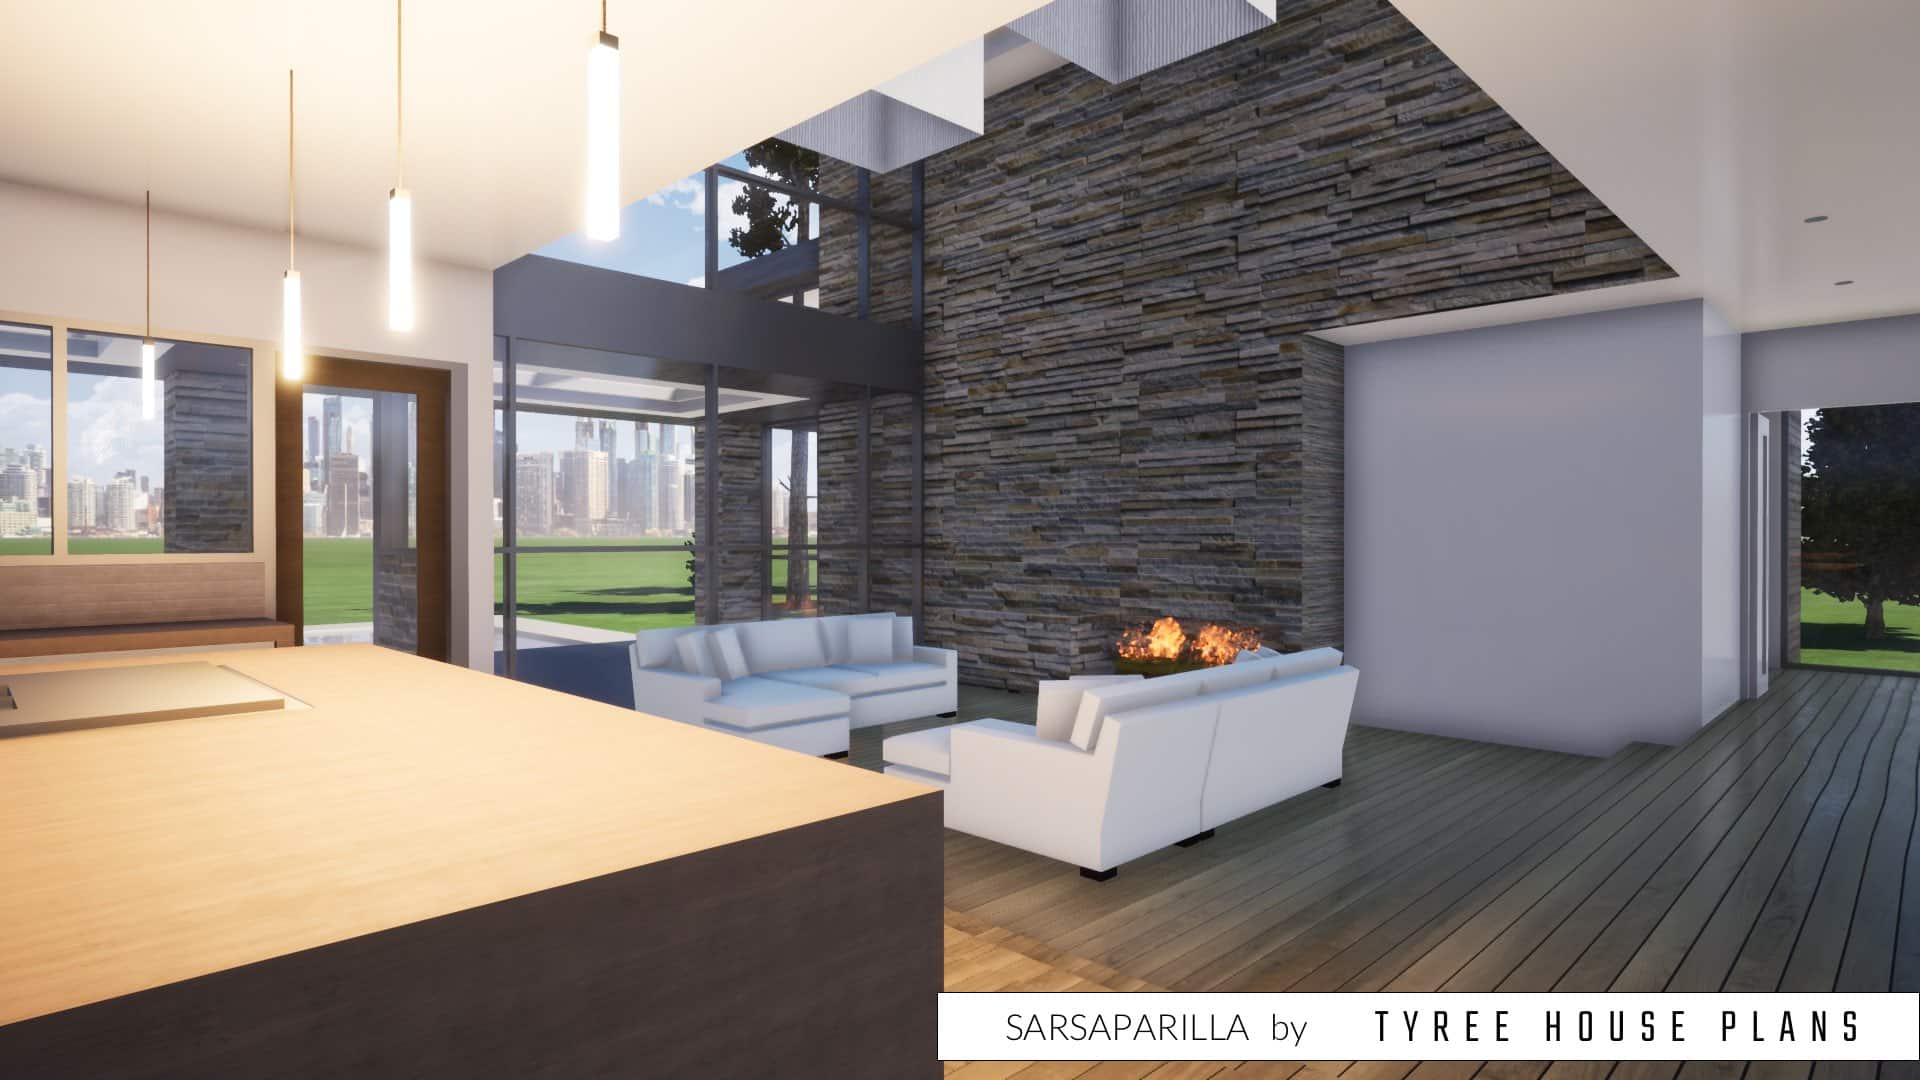 Living with high ceiling. Sarsaparilla by Tyree House Plans.